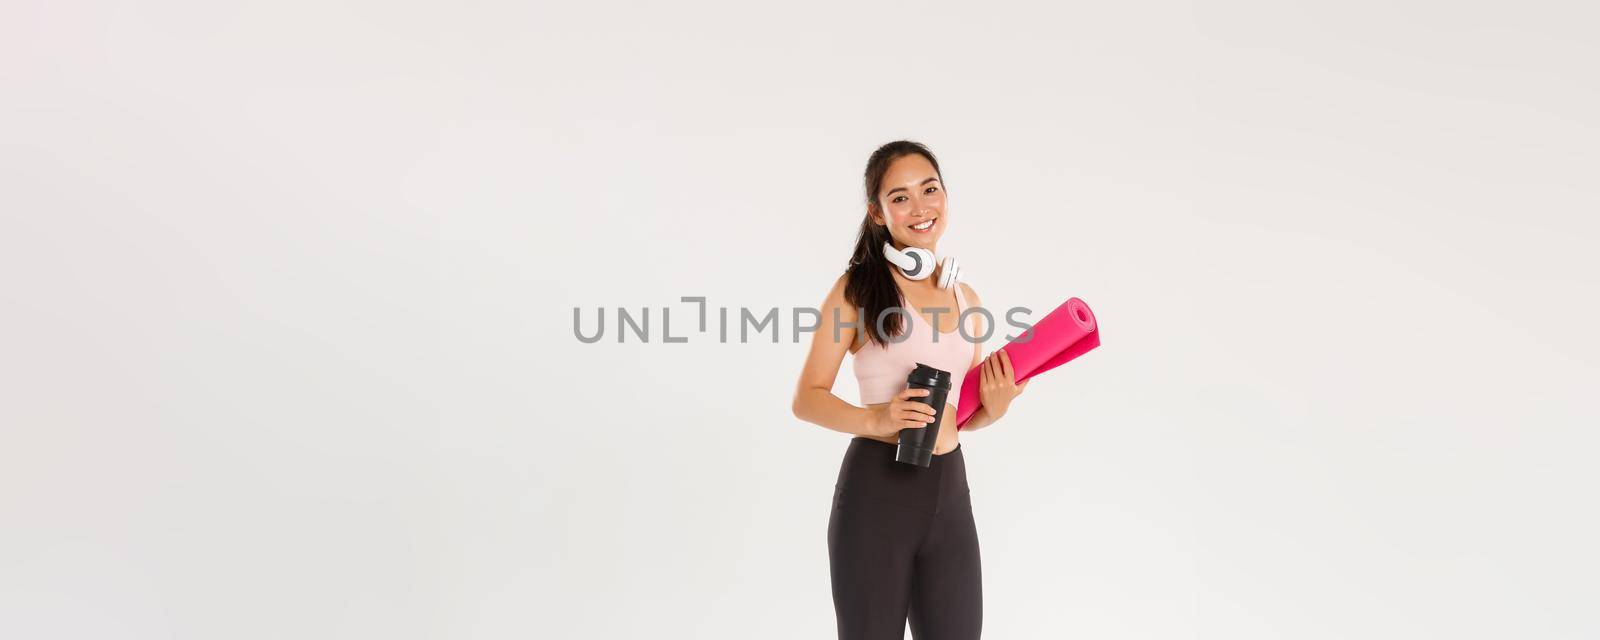 Full length of smiling slim and beautiful asian female athlete, girl carry fitness exercise rubber mat and water bottle, going for yoga classes or workout in gym with own equipment, white background.